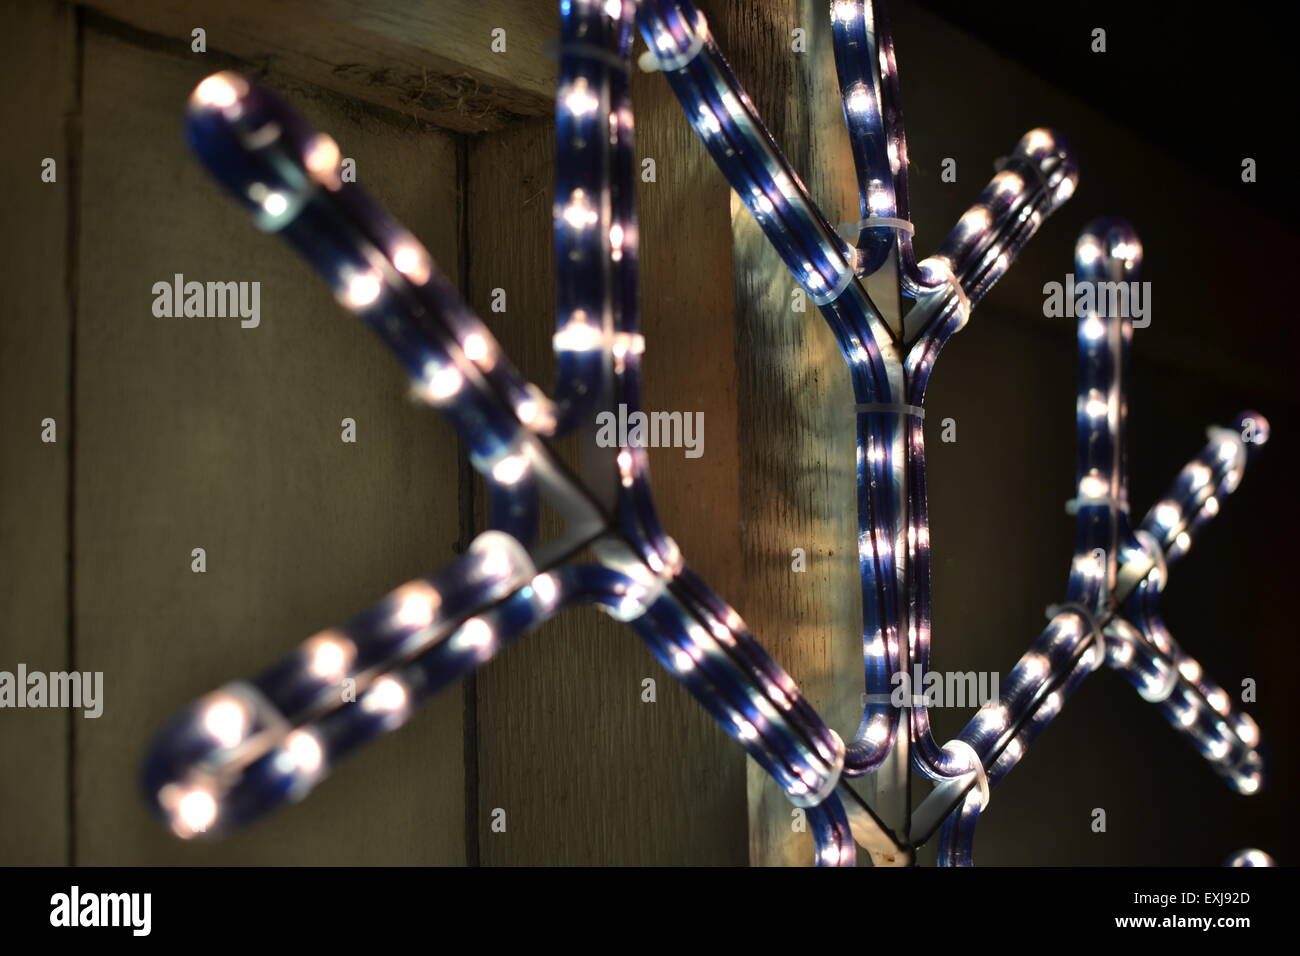 This is a Christmas light decoration outside a suburban house. The lights are in the shape of a snowflake hung on a fence. Stock Photo